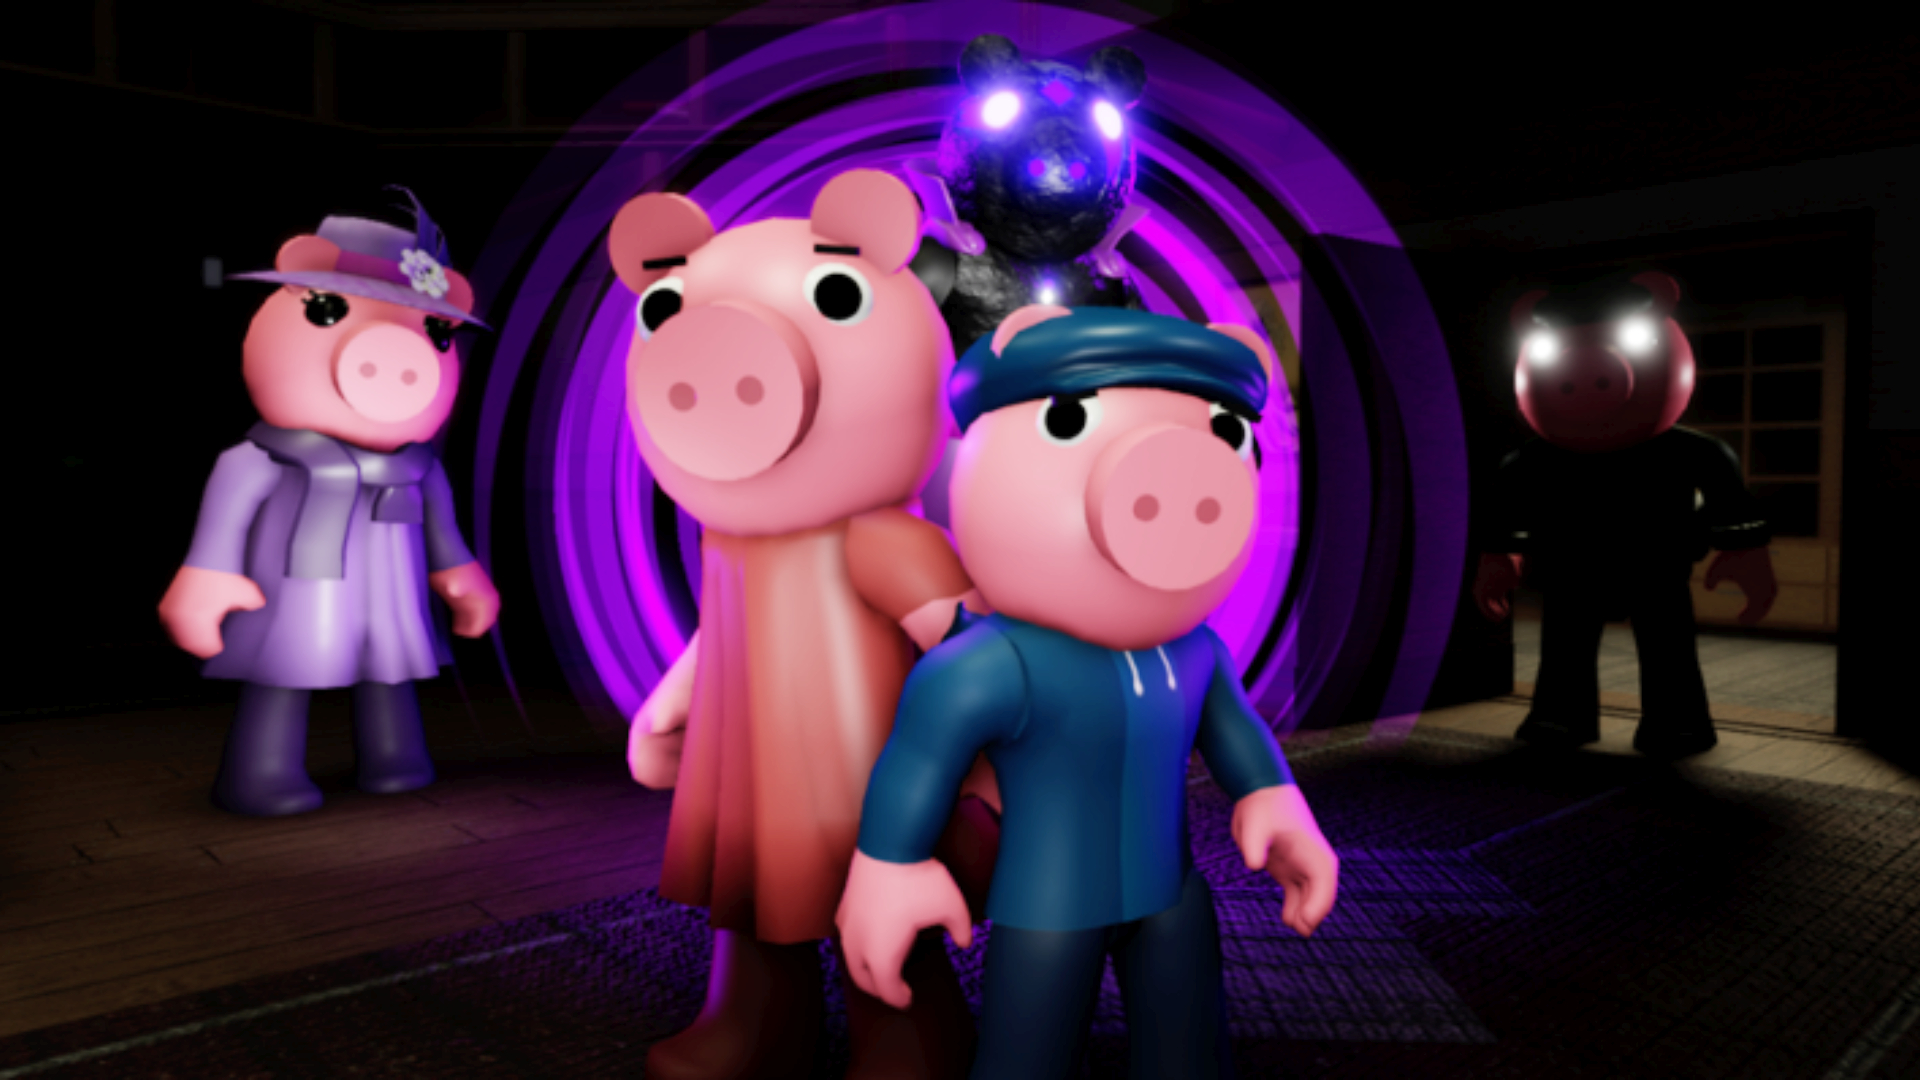 Branched Realities on X: The Piggy: Branched Realities OUTBREAK Game-mode  is now OUT! 🧪 🔗 :  🧟‍♂️   / X